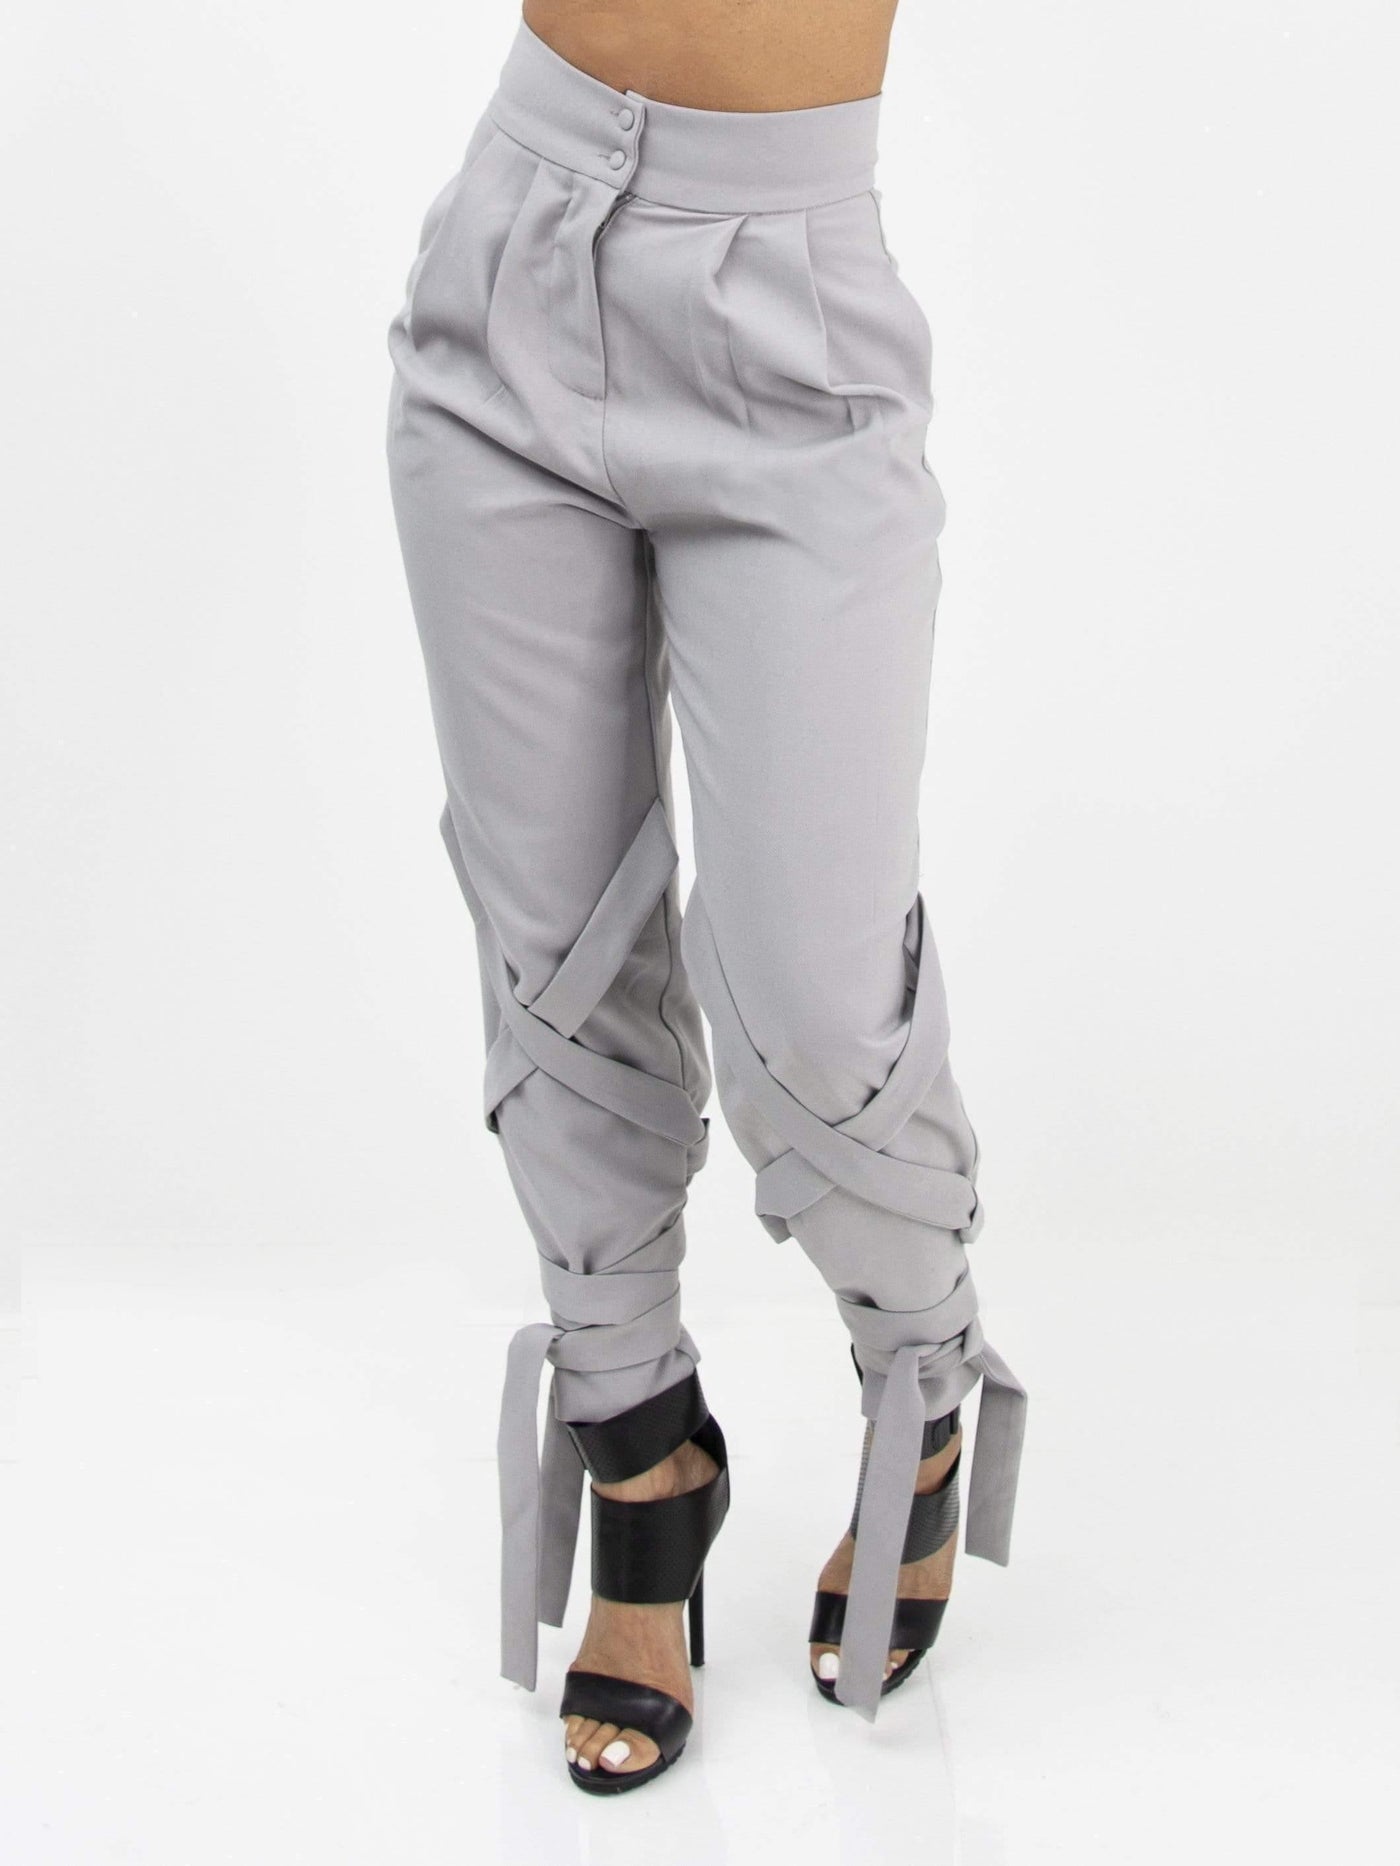 Strapped | Stylish Pants SIZE LARGE - Statement Piece NY _tab_size-chart, Bottom, Bottoms, Brooklyn Boutique, chic, final, final sale, Grey, leg ties, Long Pants, Misses, Monochrome, not clearance, pants with straps, pants with ties, Ships from USA, SPNY Exclusive, statement, statement piece, Statement Piece Boutique, statement piece ny, Statement Pieces, Statement Pieces Boutique, unique pants, unique pants for ladies, Women's Boutique Statement Bottoms